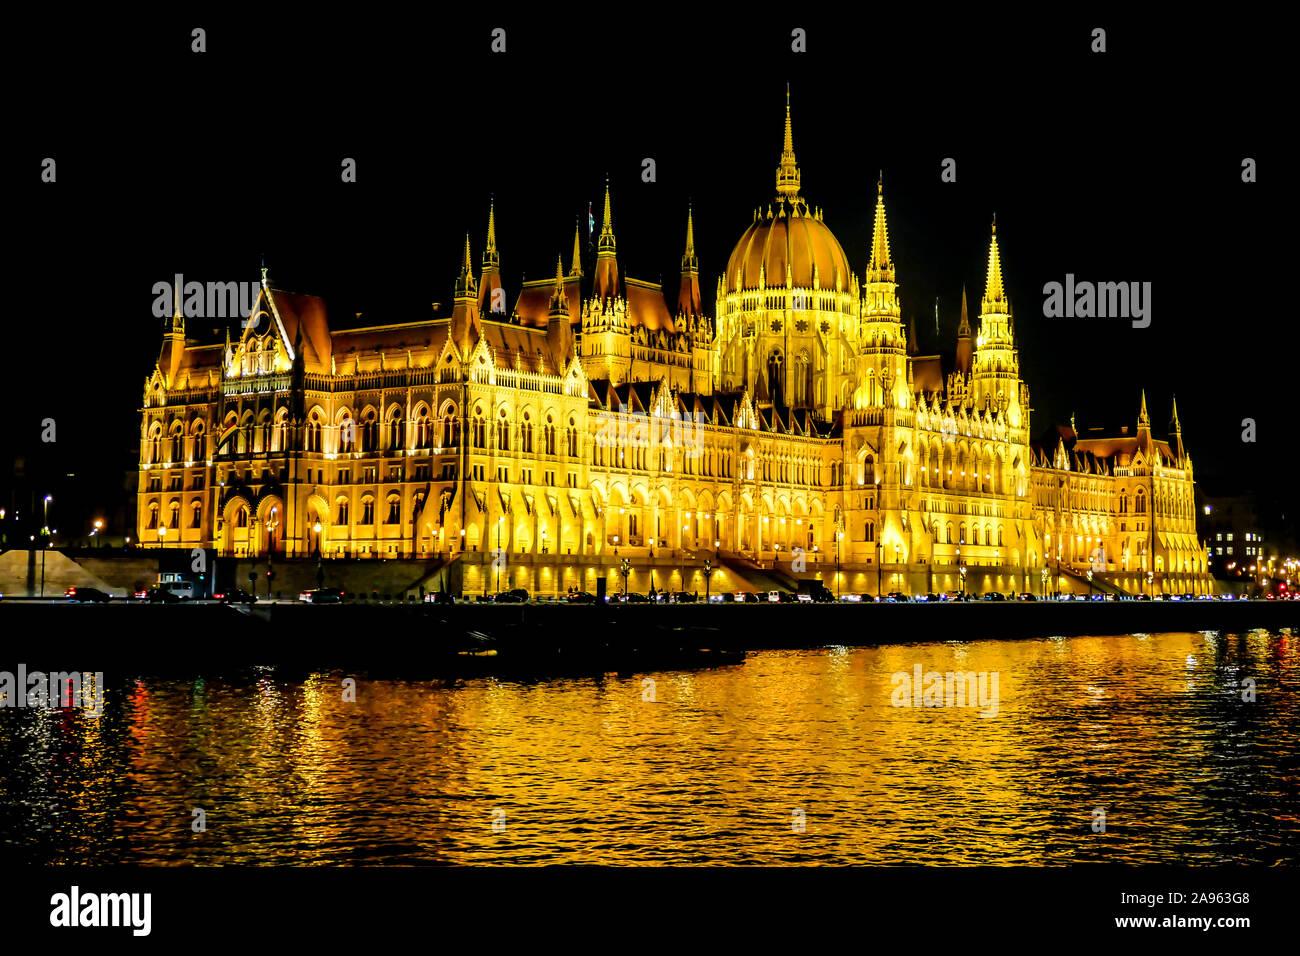 The Hungarian Parliament building at night in Budapest, the capital of Hungary Stock Photo